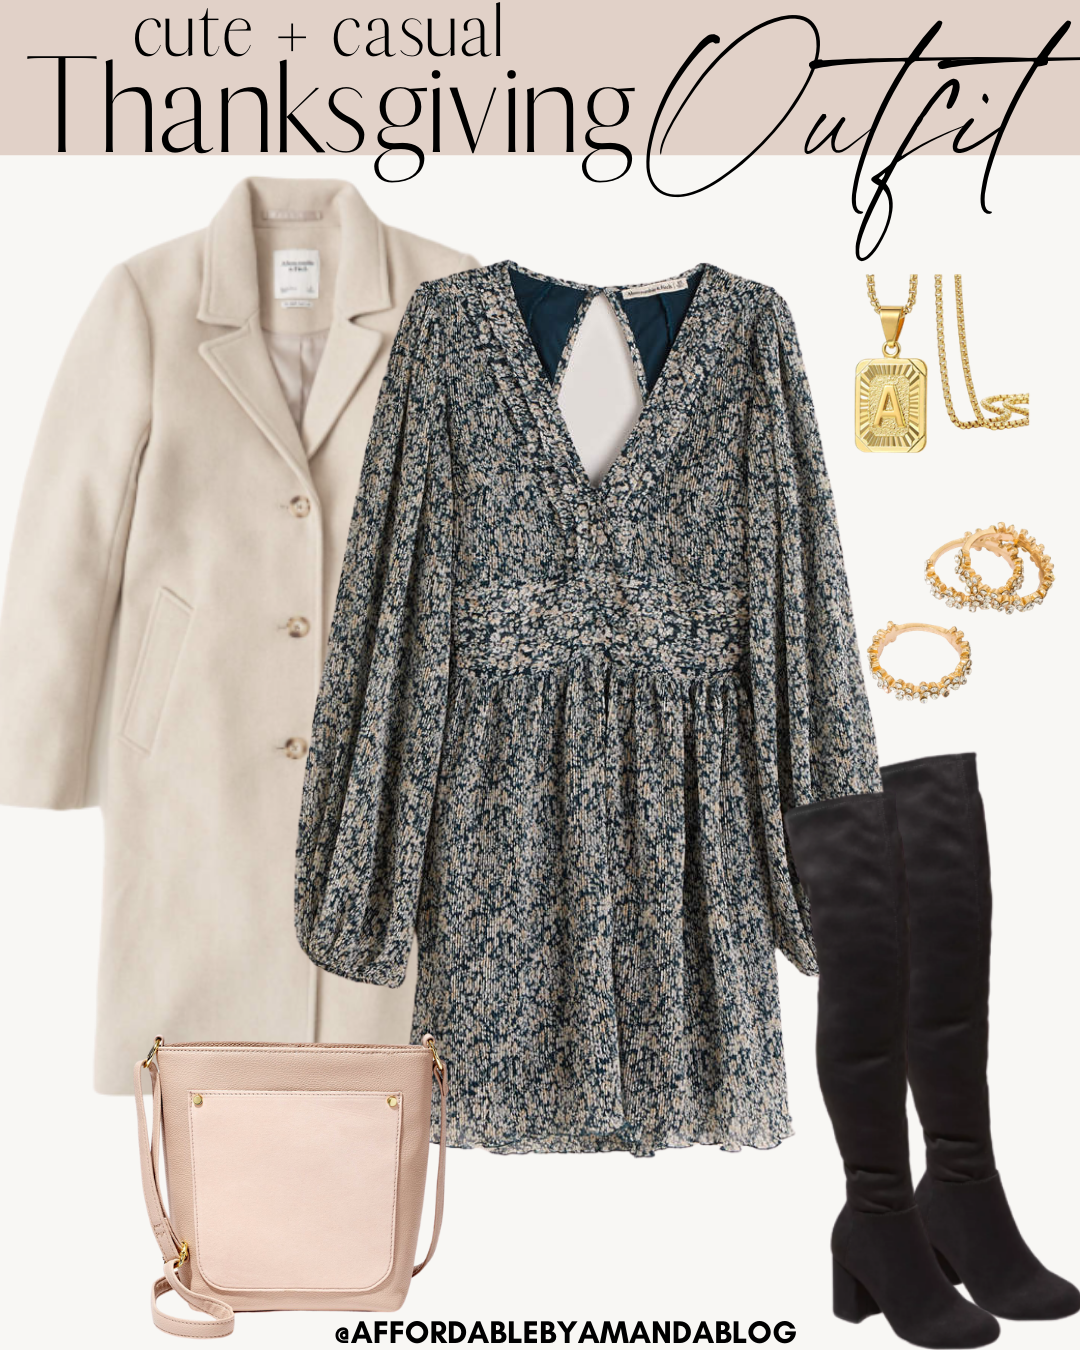 16 THANKSGIVING OUTFIT IDEAS FROM CASUAL TO DRESSY - Torey's Treasures